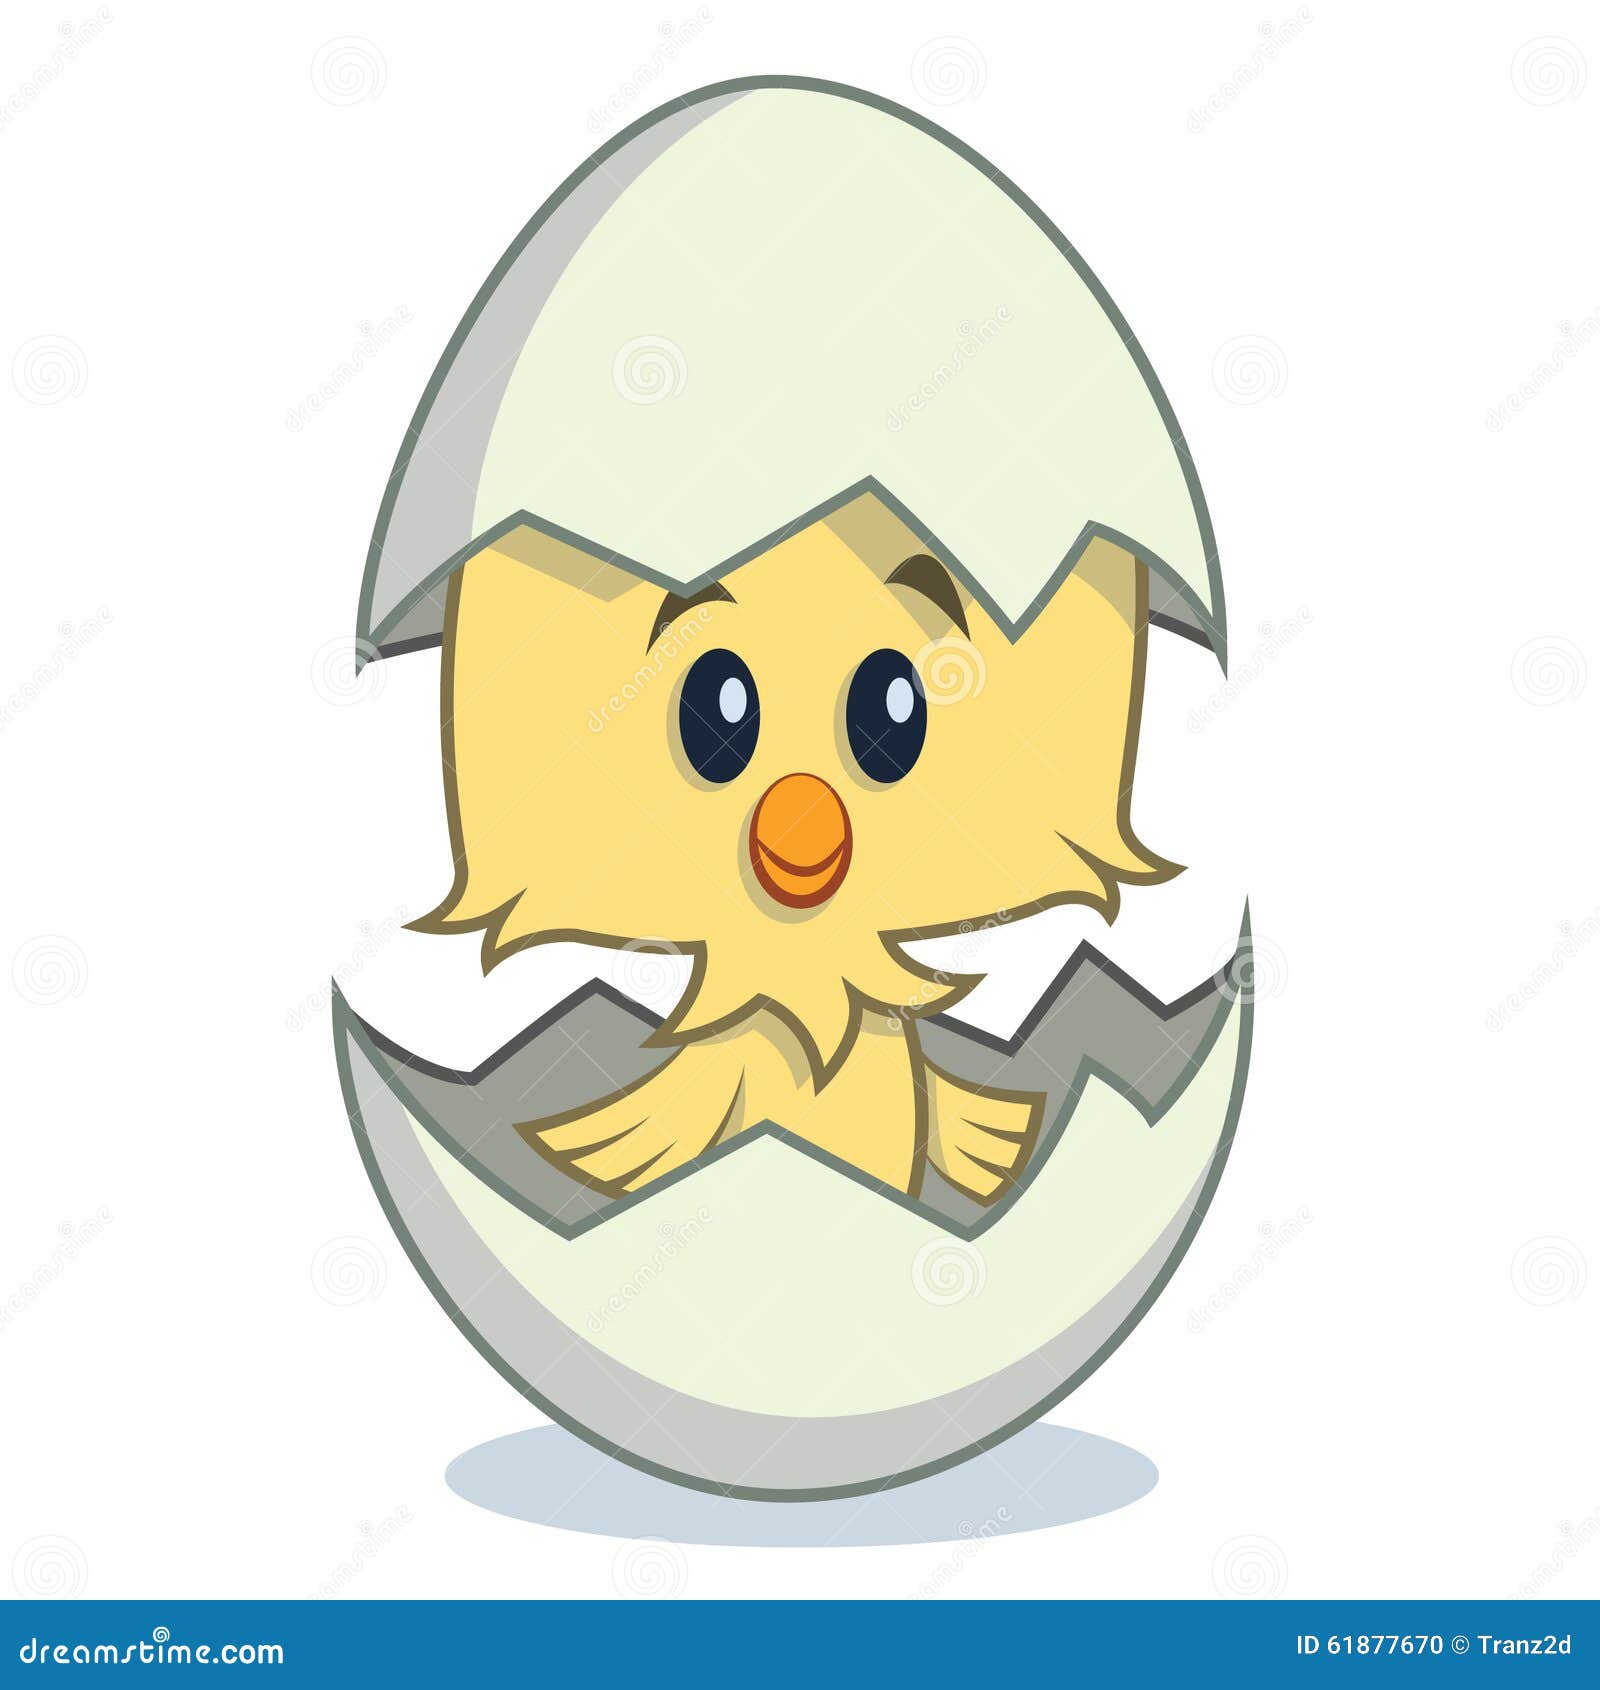 chick hatching clipart - photo #28